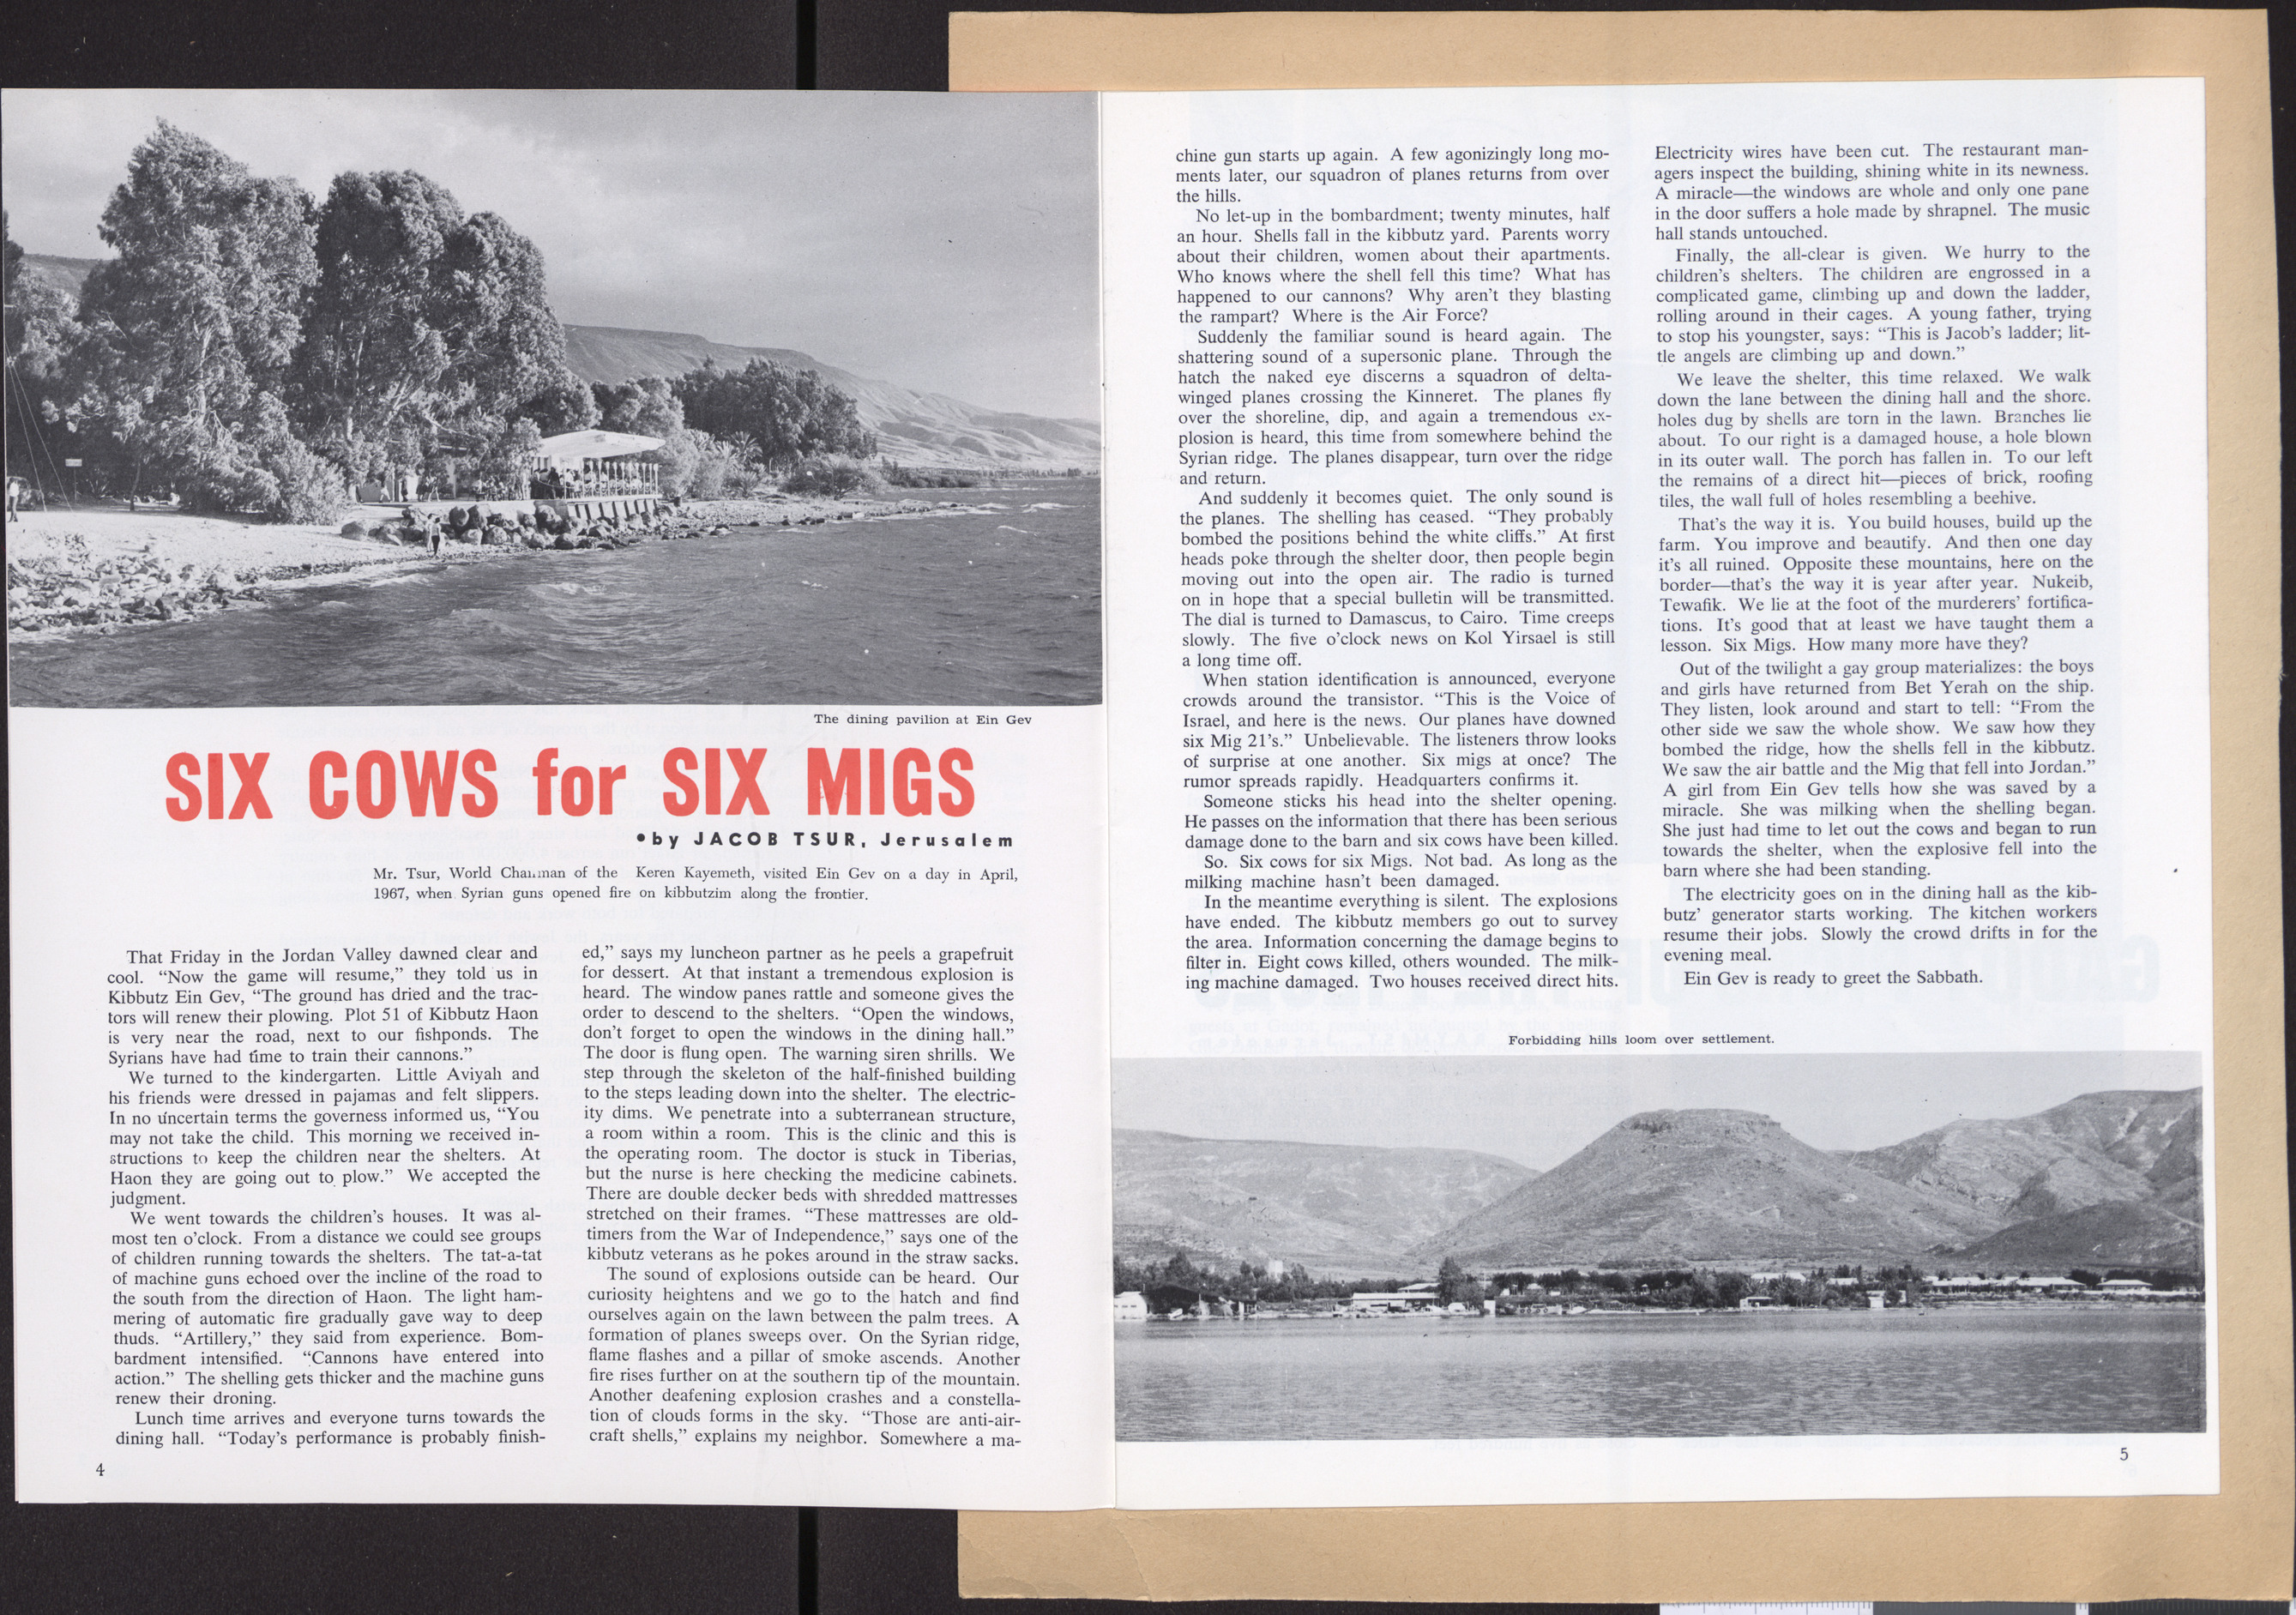 Magazine, Land and Life, Vol. XXII, No. 5, Summer 1967, pages 4-5